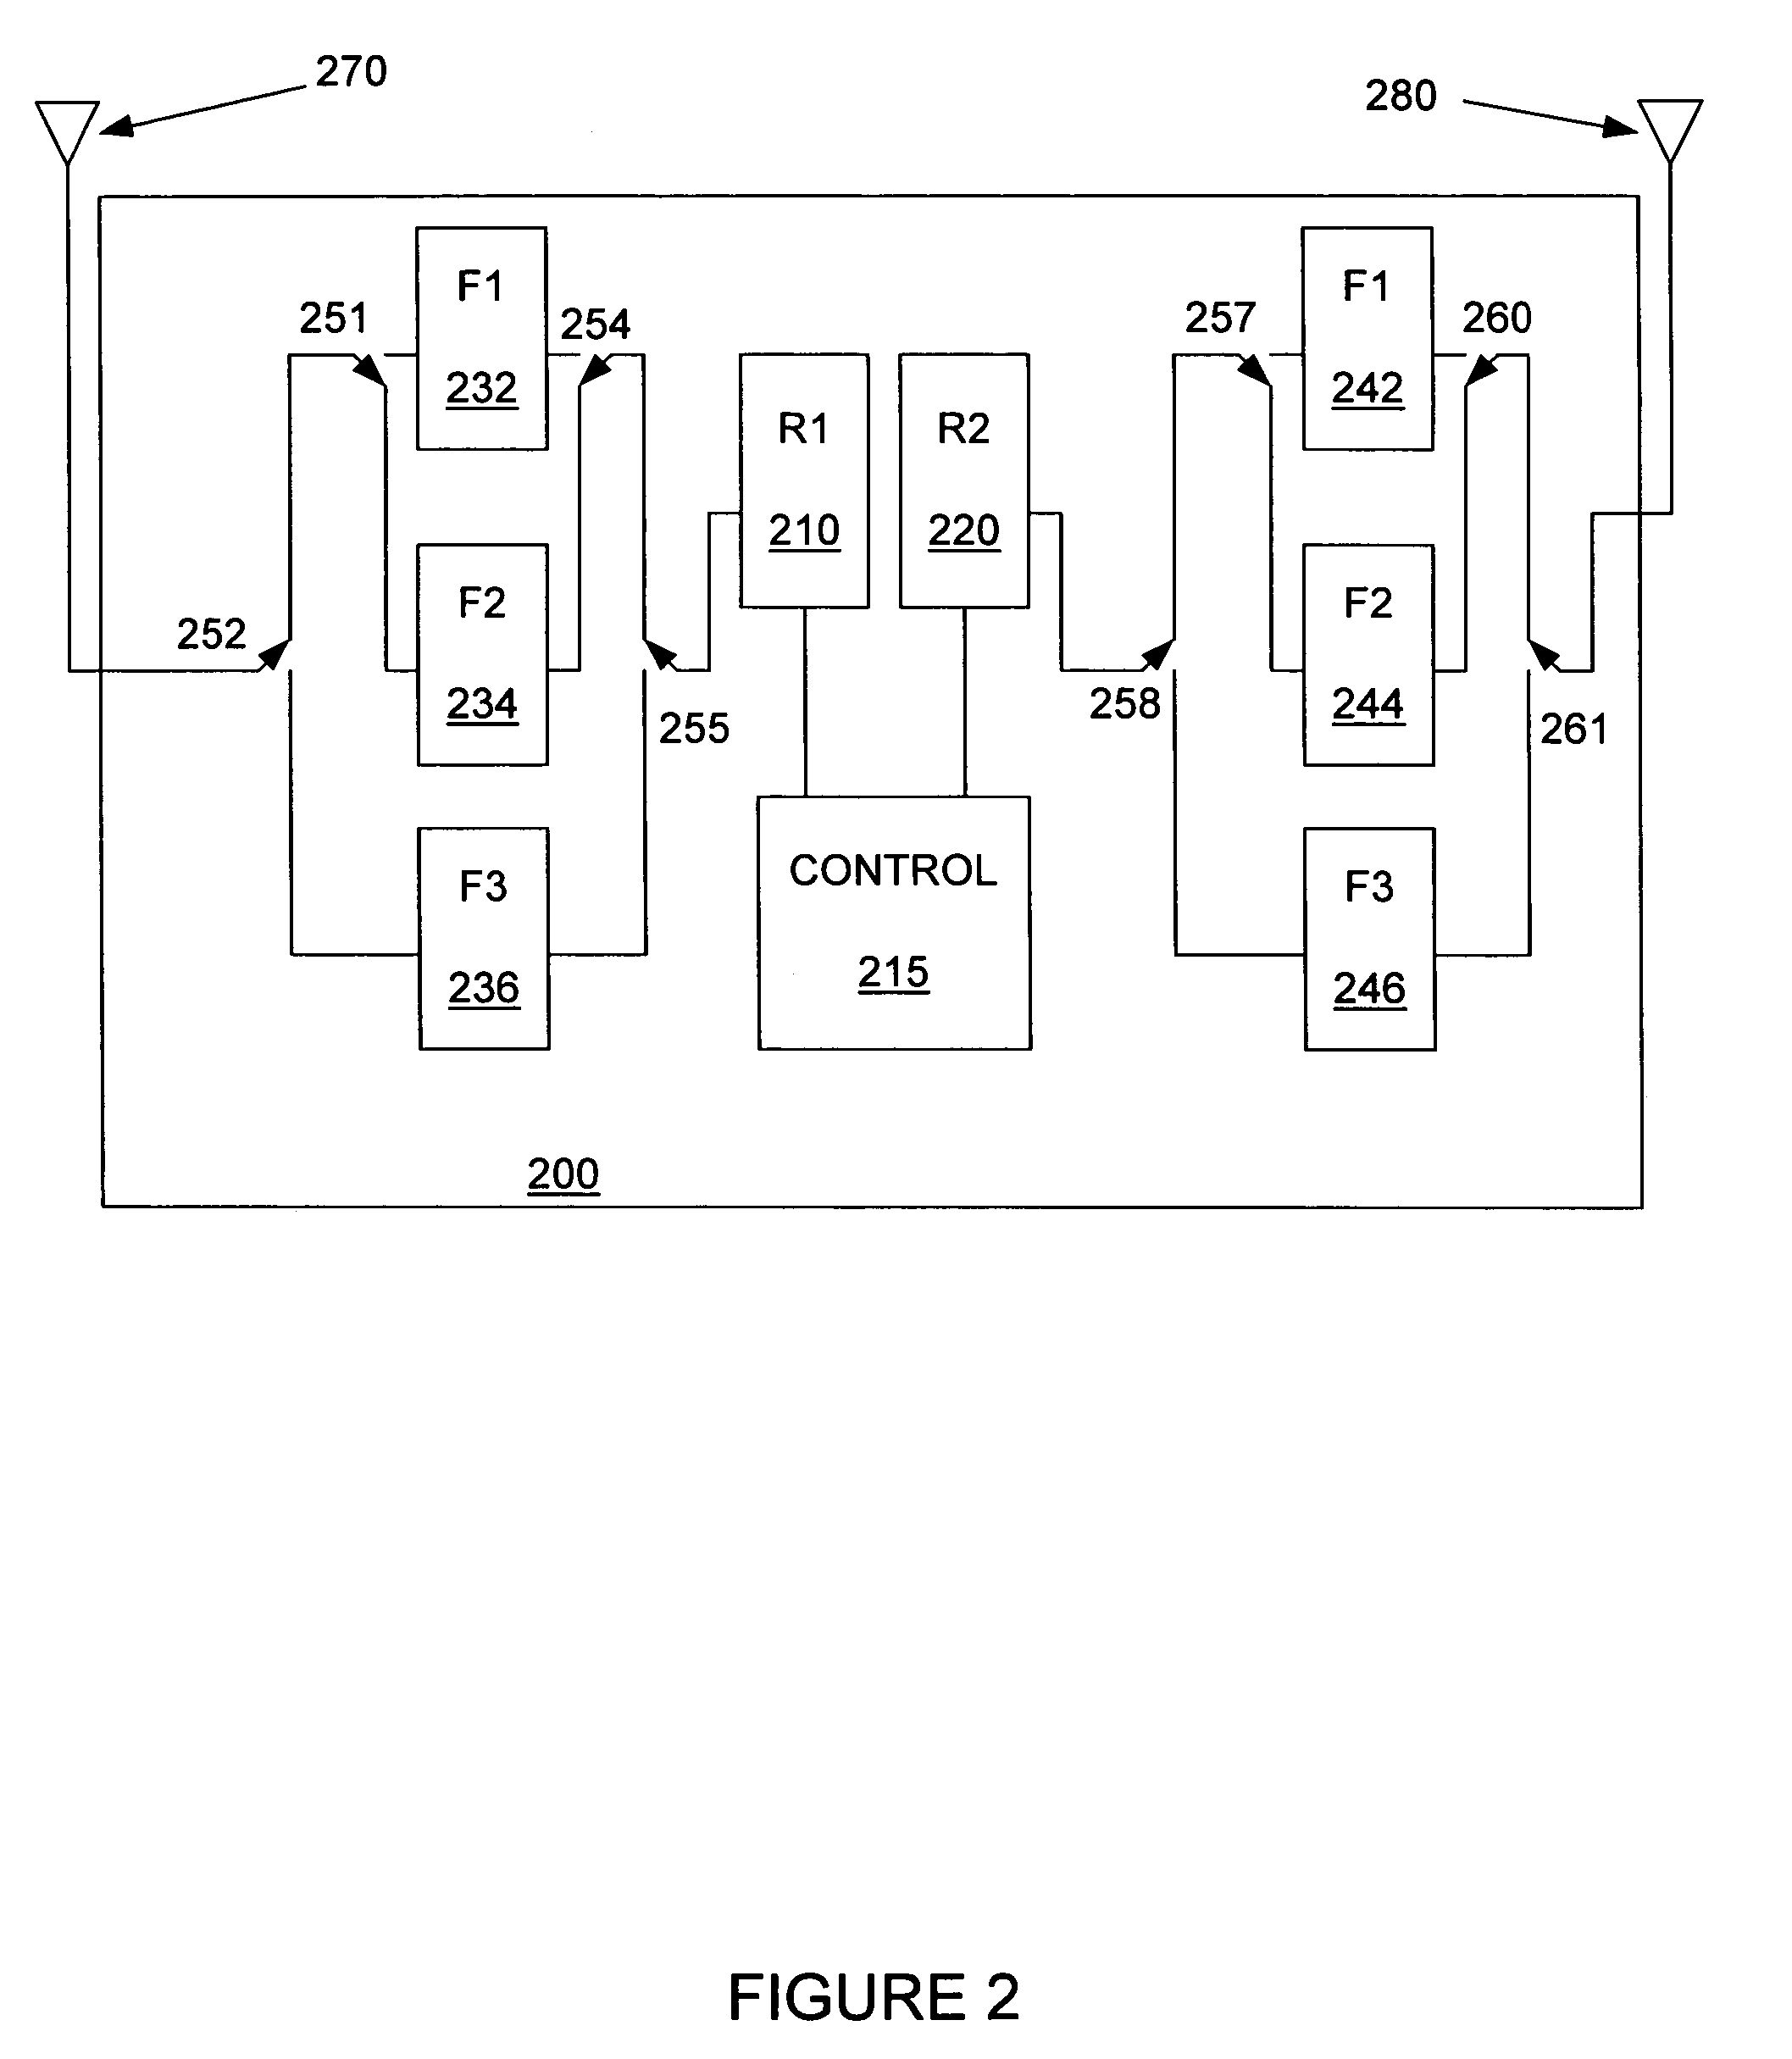 Minimization of channel filters within wireless access nodes